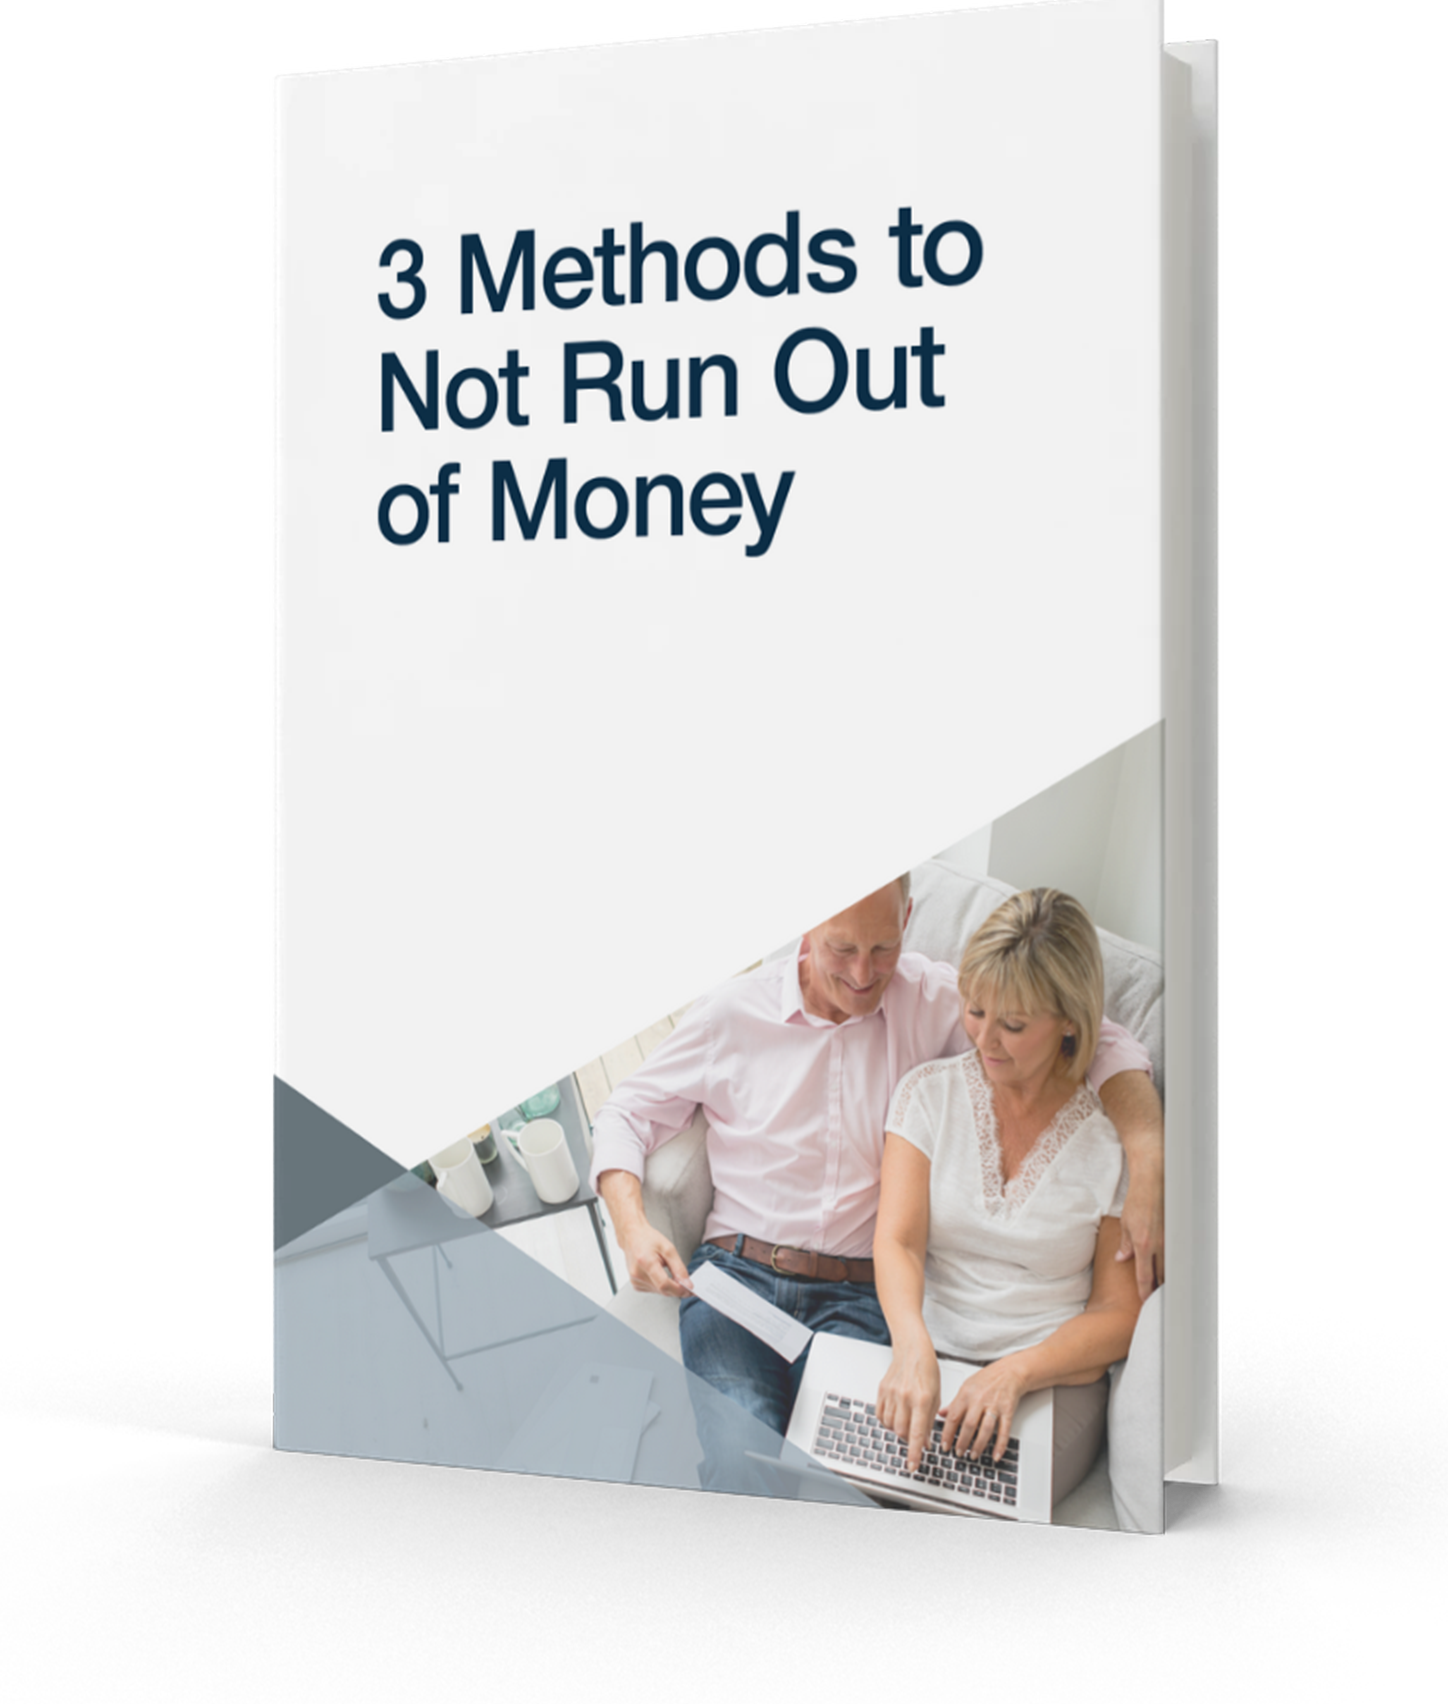 3 Methods to Not Run Out of Money